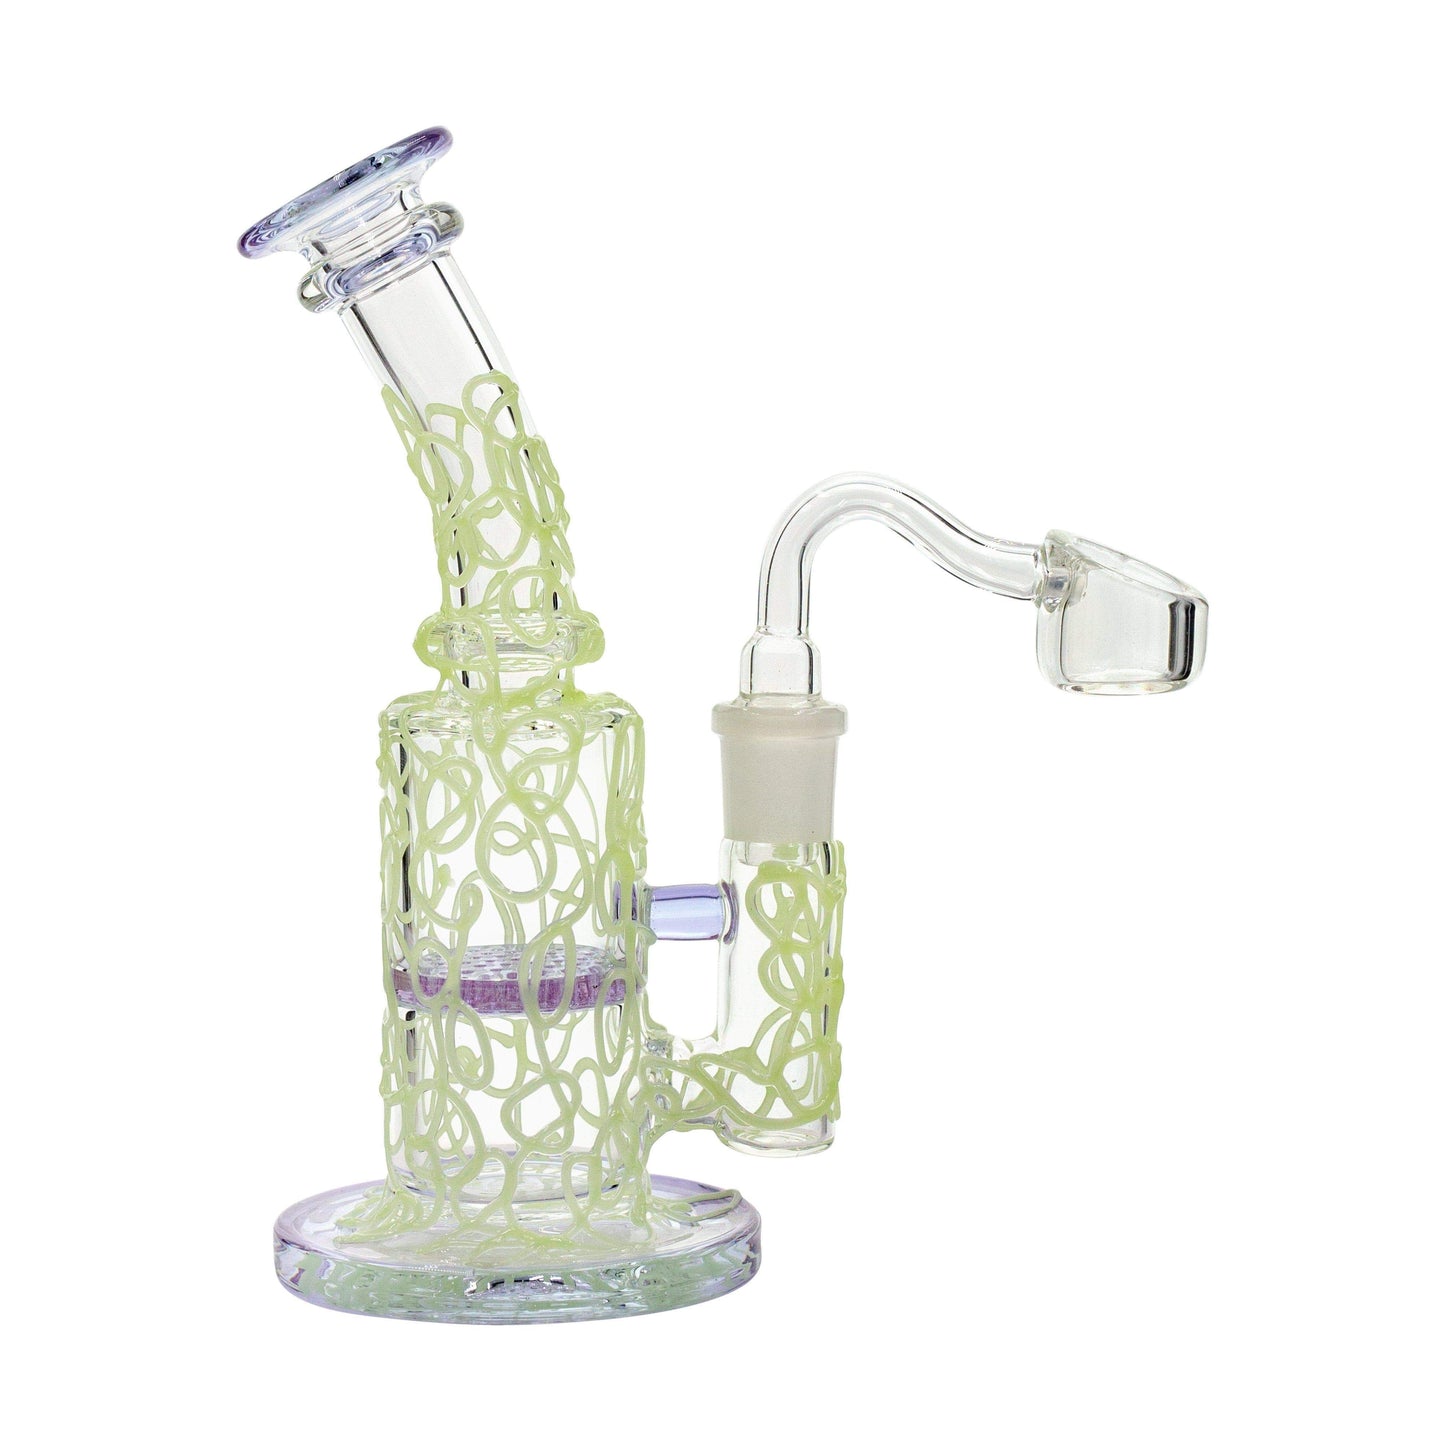 Petite 7-inch glass dab rig smoking device with glow in the dark accents honeycomb perc